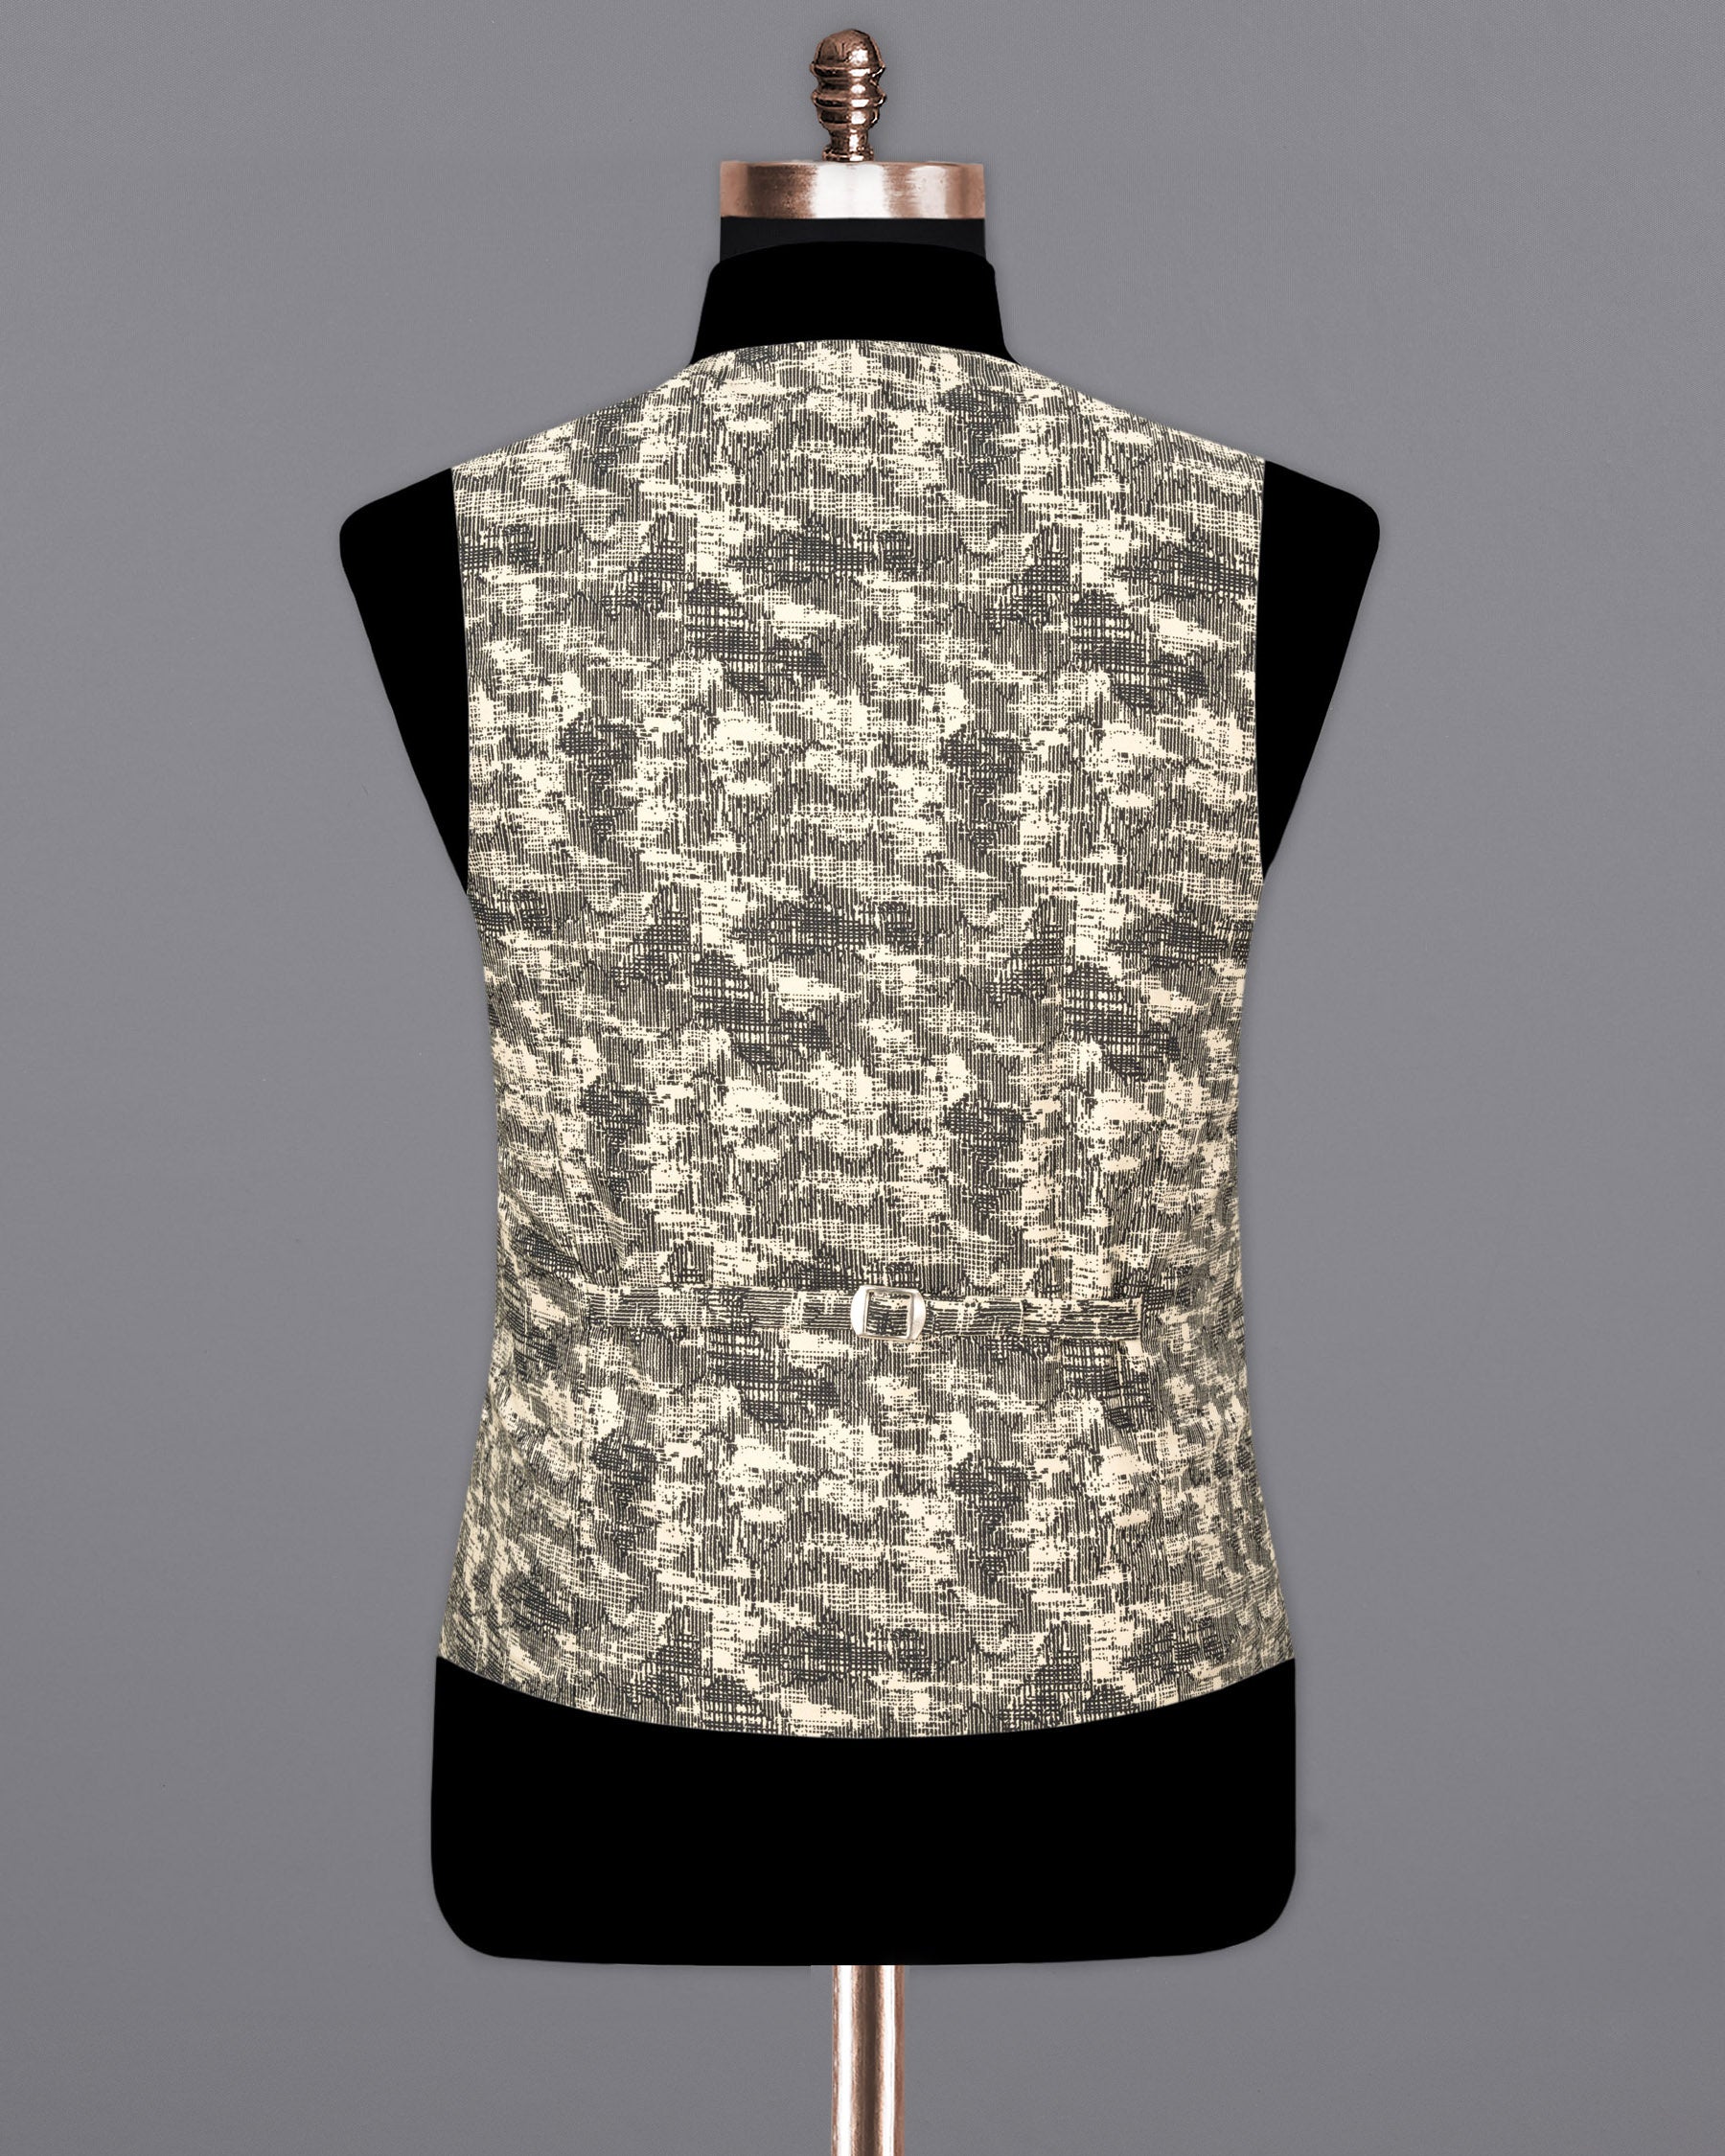 Bastille and Champagne Beige Abstract Print Textured Waistcoat V1680-36, V1680-38, V1680-40, V1680-42, V1680-44, V1680-46, V1680-48, V1680-50, V1680-52, V1680-54, V1680-56, V1680-58, V1680-60